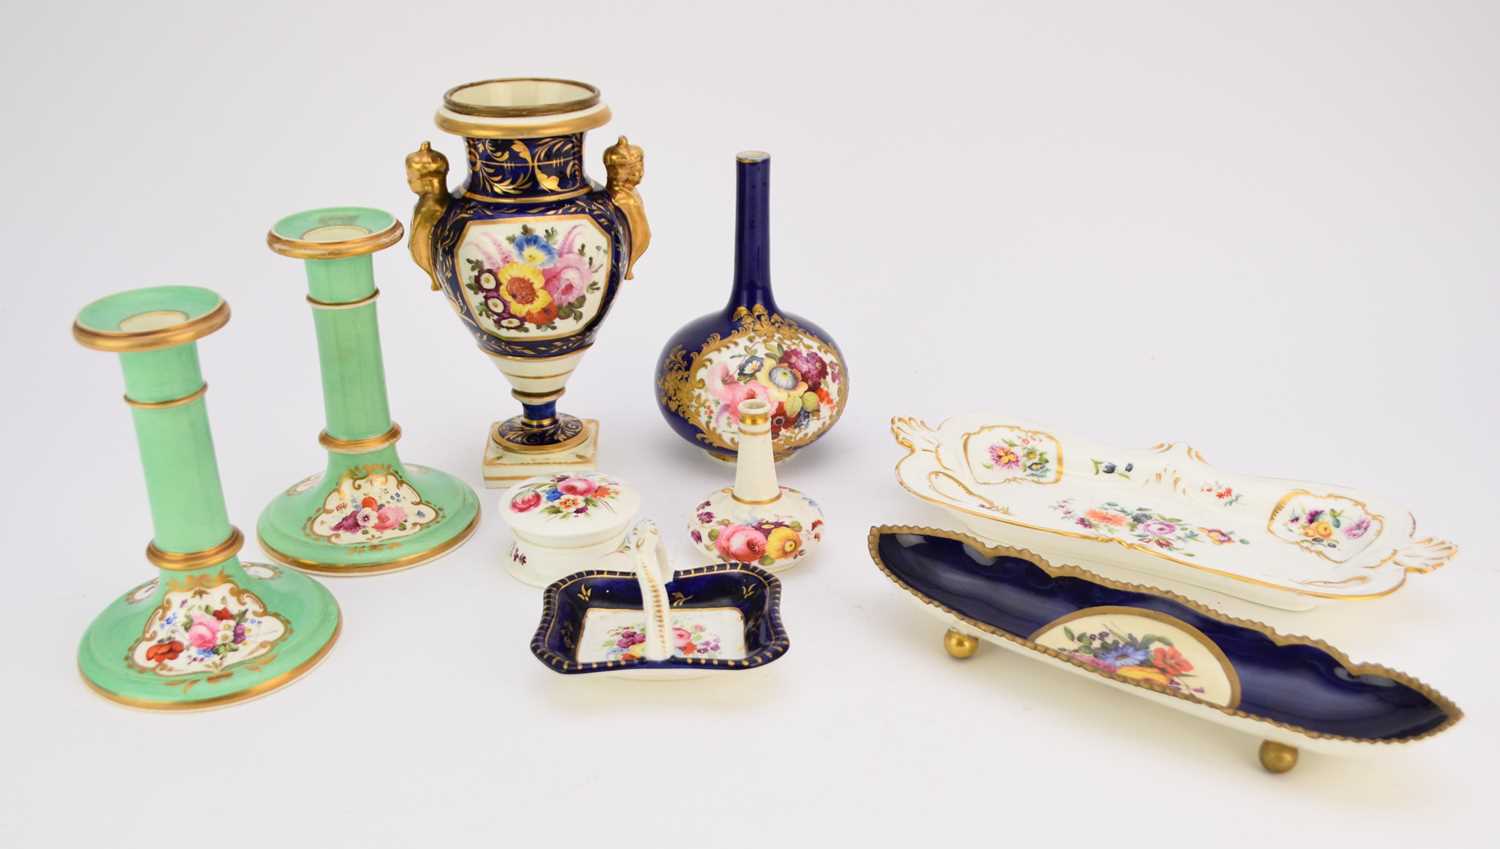 Lot 61 - Group of early and mid-19th century English porcelain